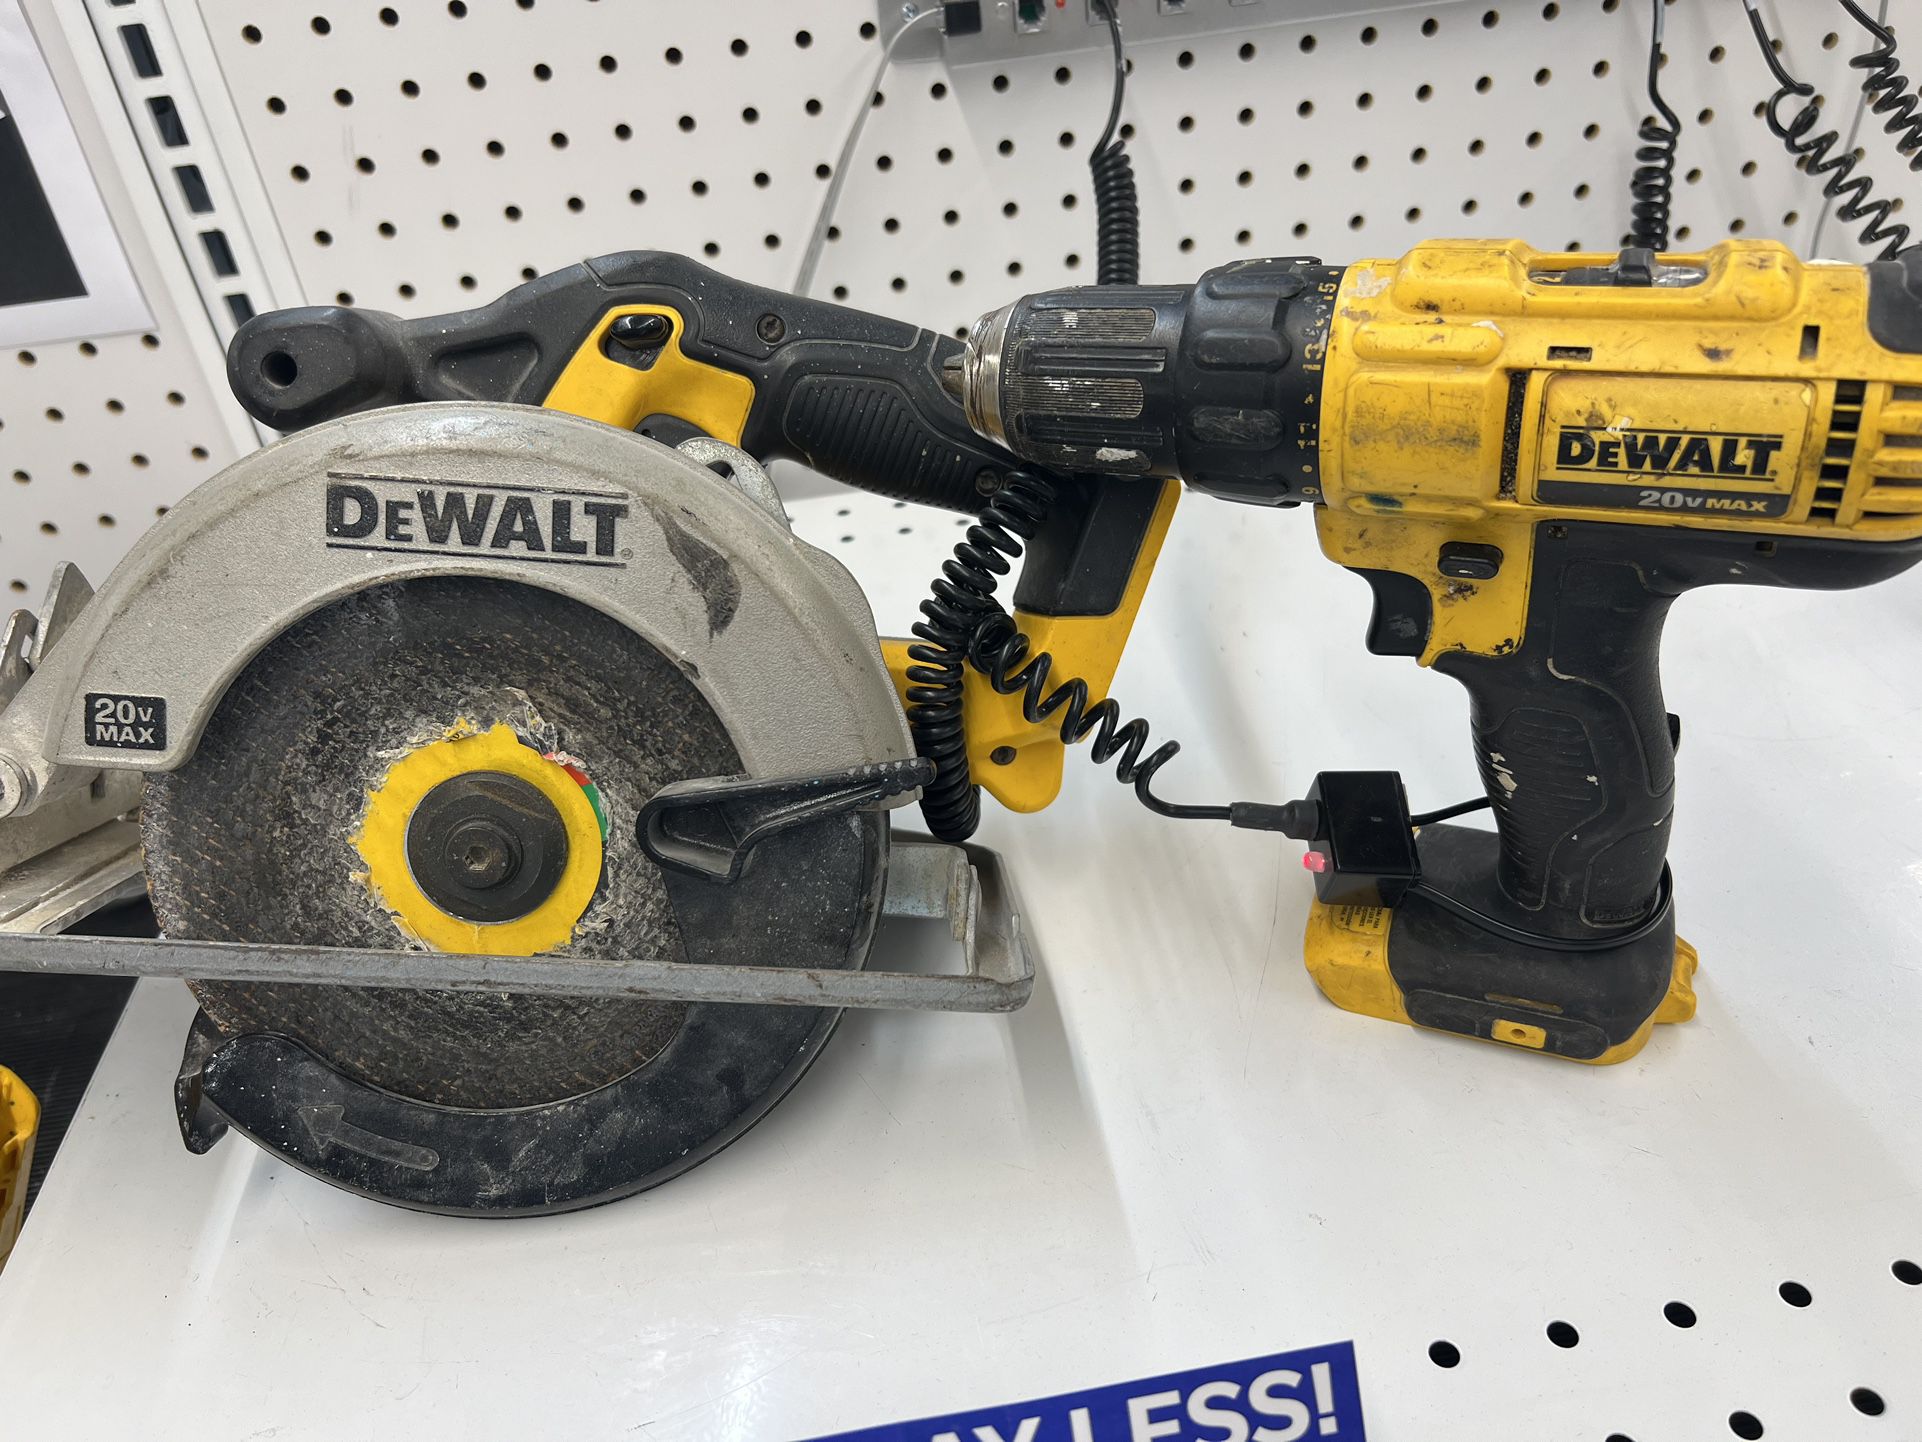 Saw And Drill 